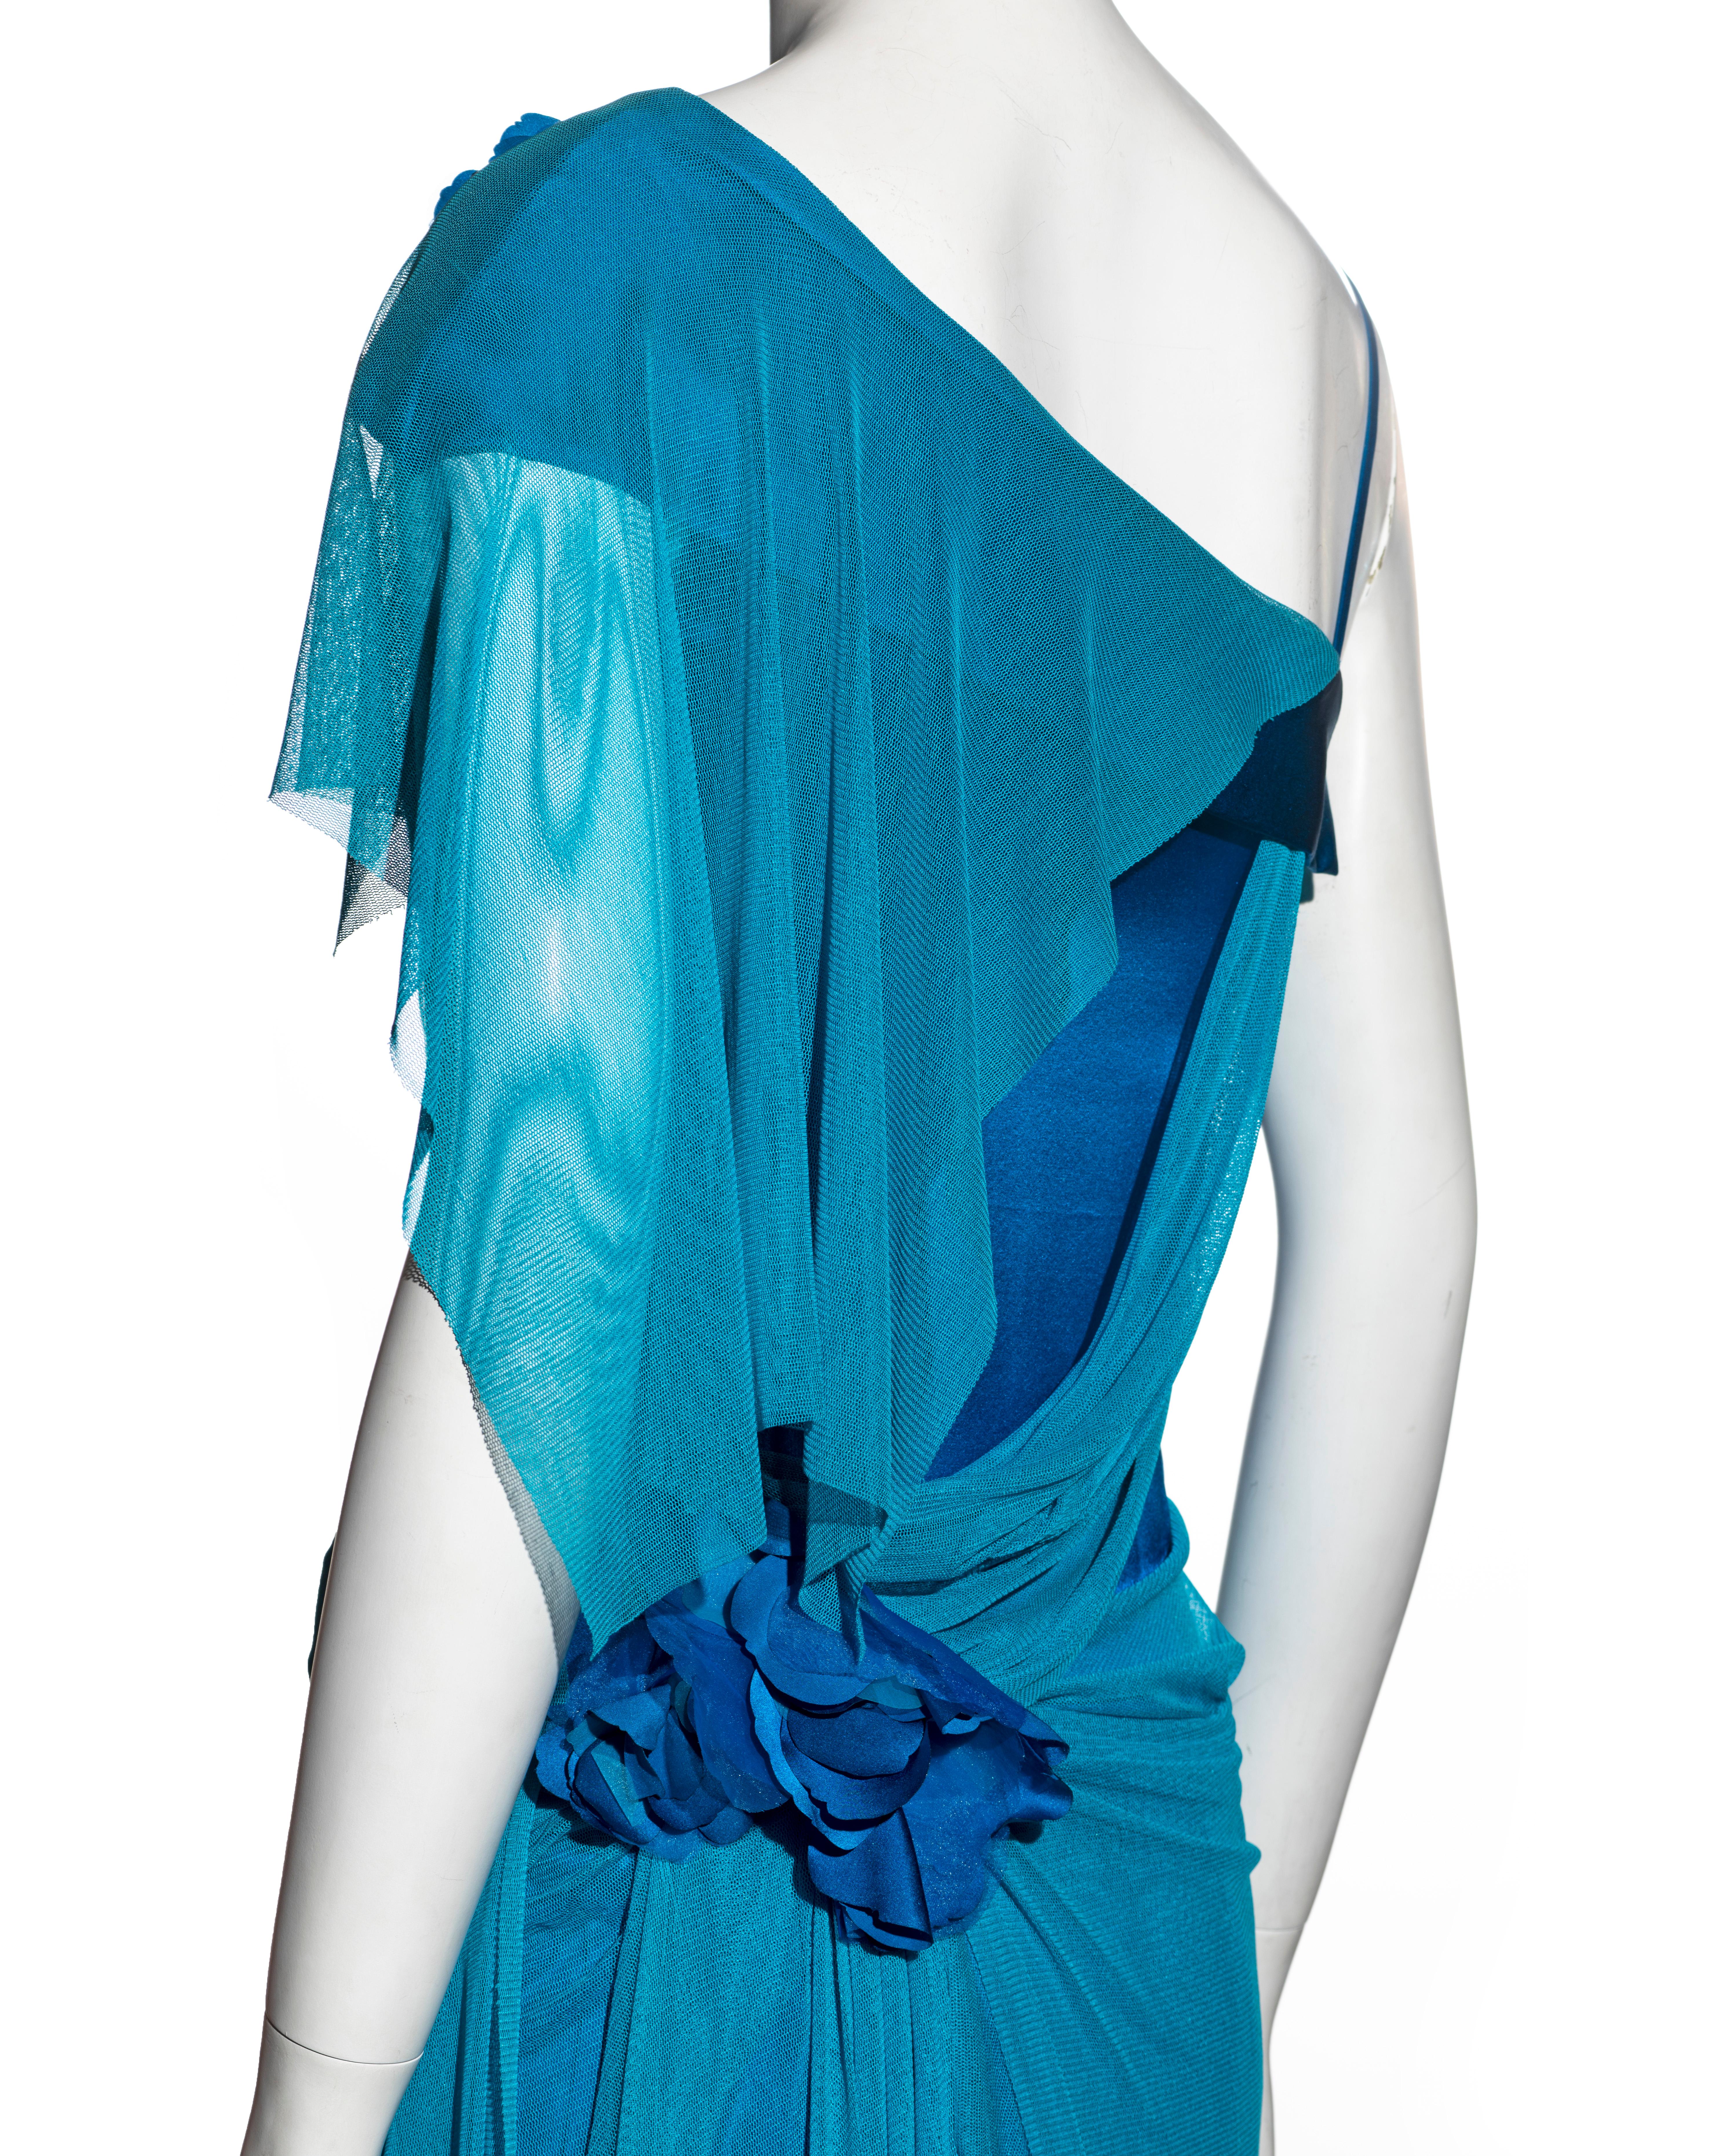 Women's Issey Miyake blue silk dress with drapedmesh overlay, ss 2005 For Sale